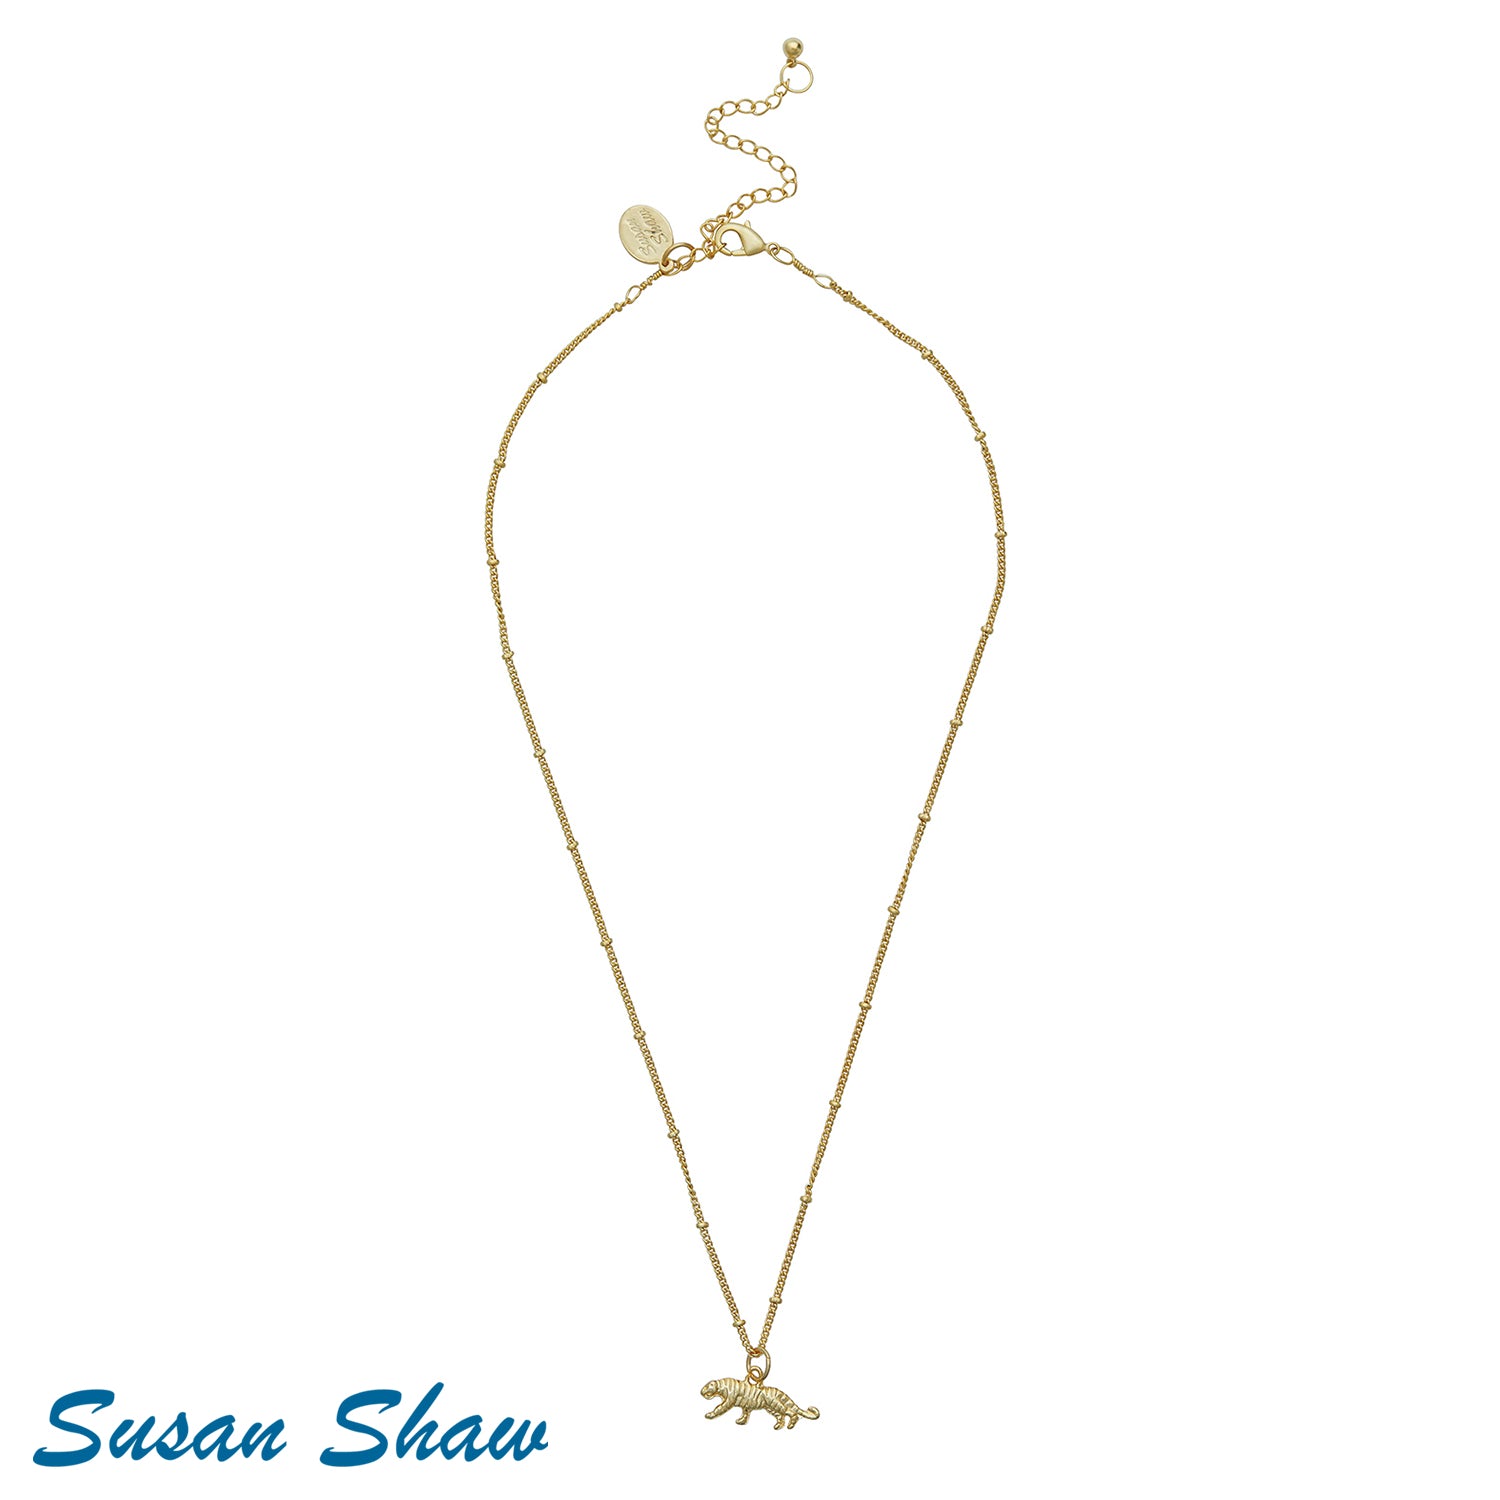 Susan Shaw Handcast Gold Tiny Tiger Necklace.